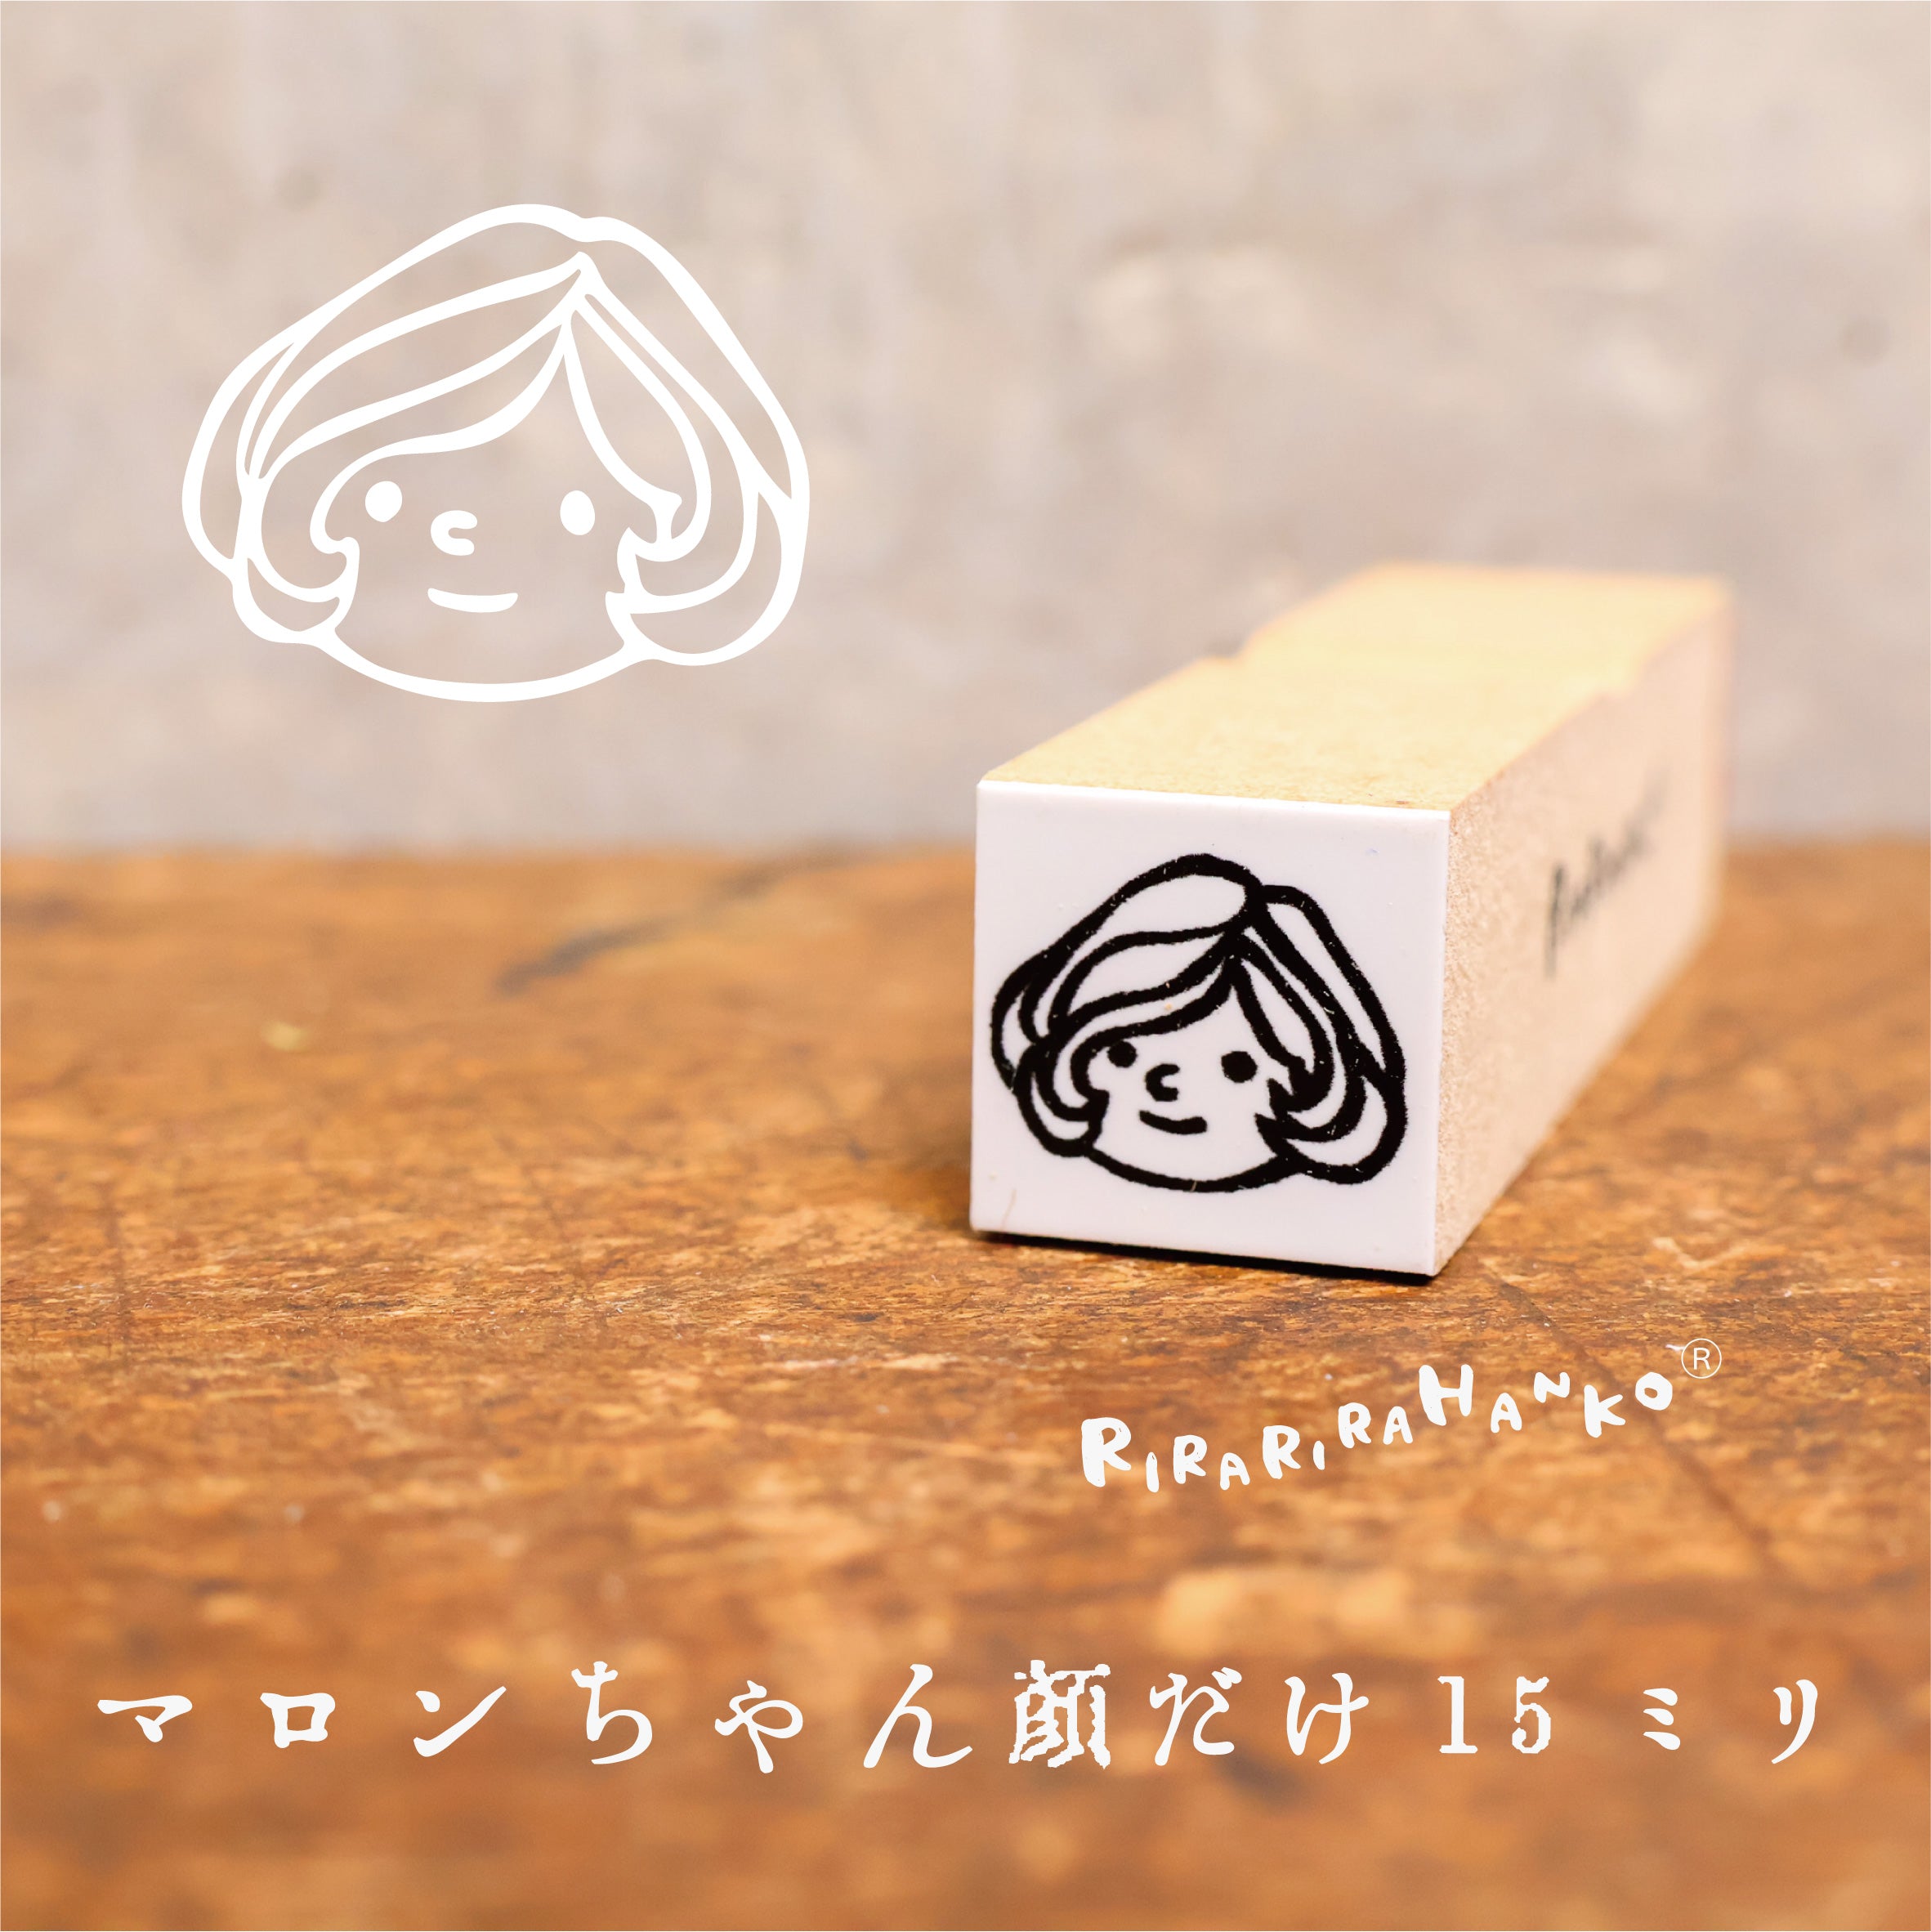 Maron-chan "Face Stamp"